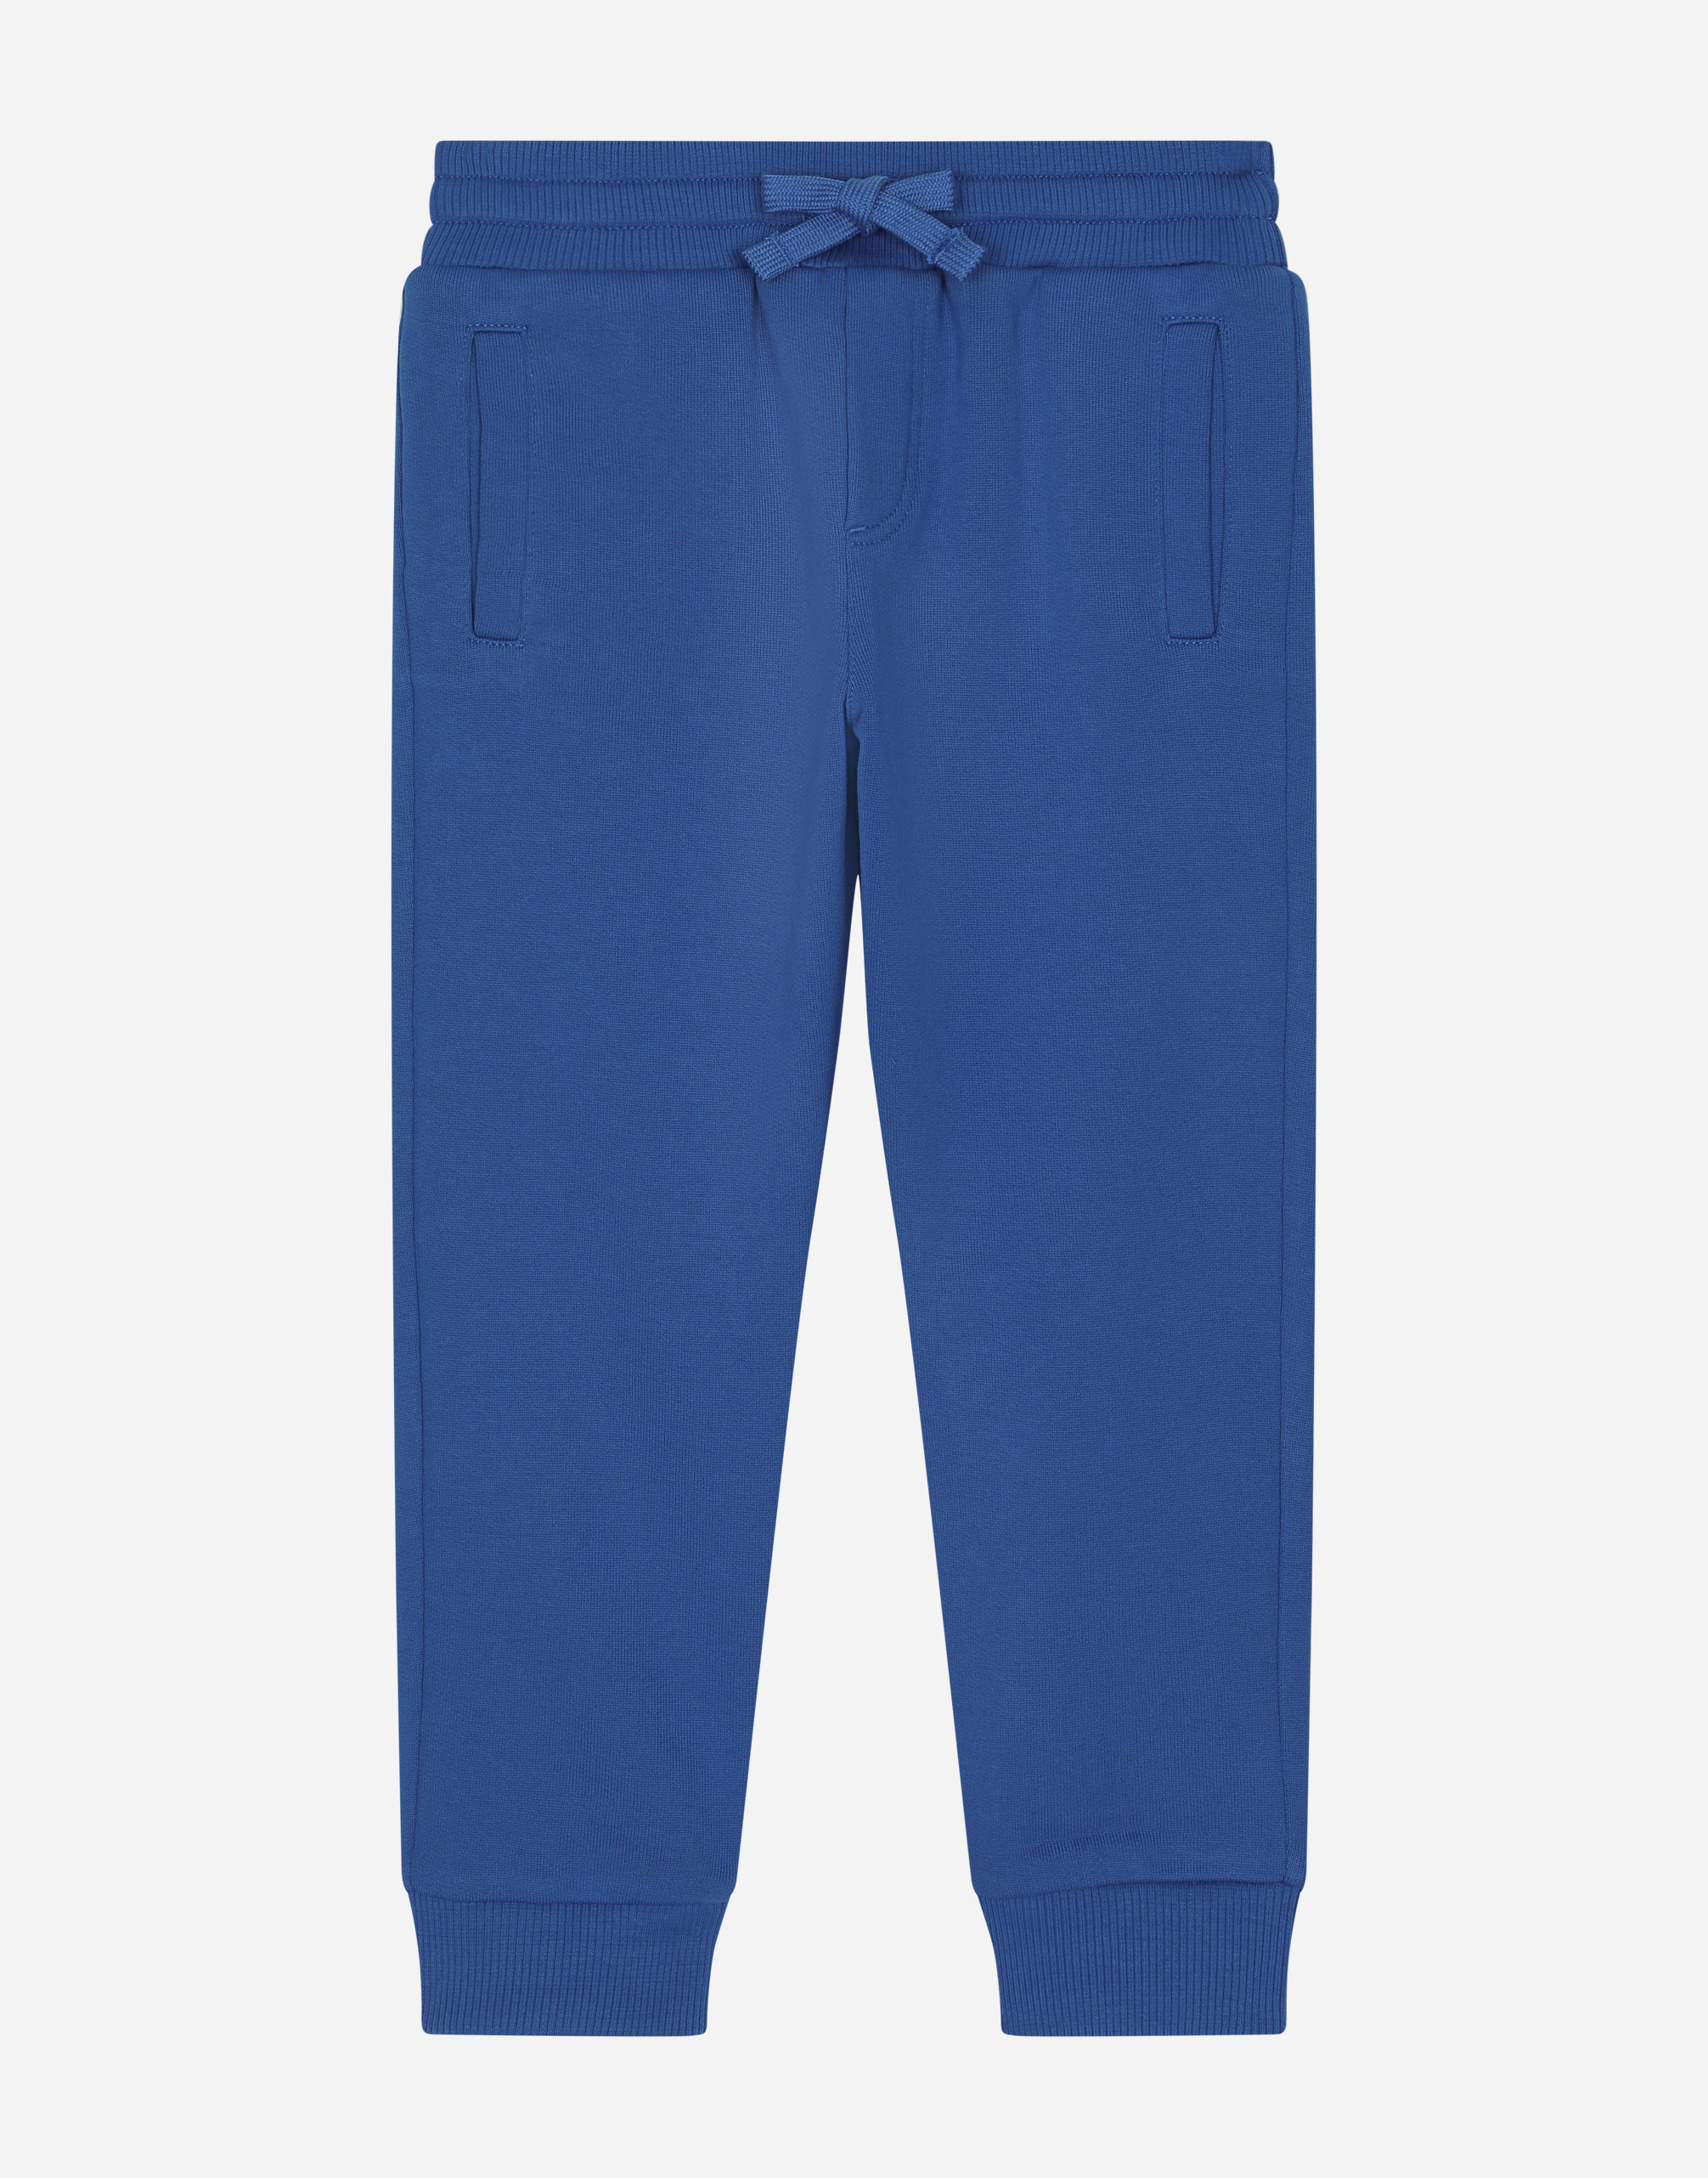 Jersey jogging pants with branded tag in Turquoise